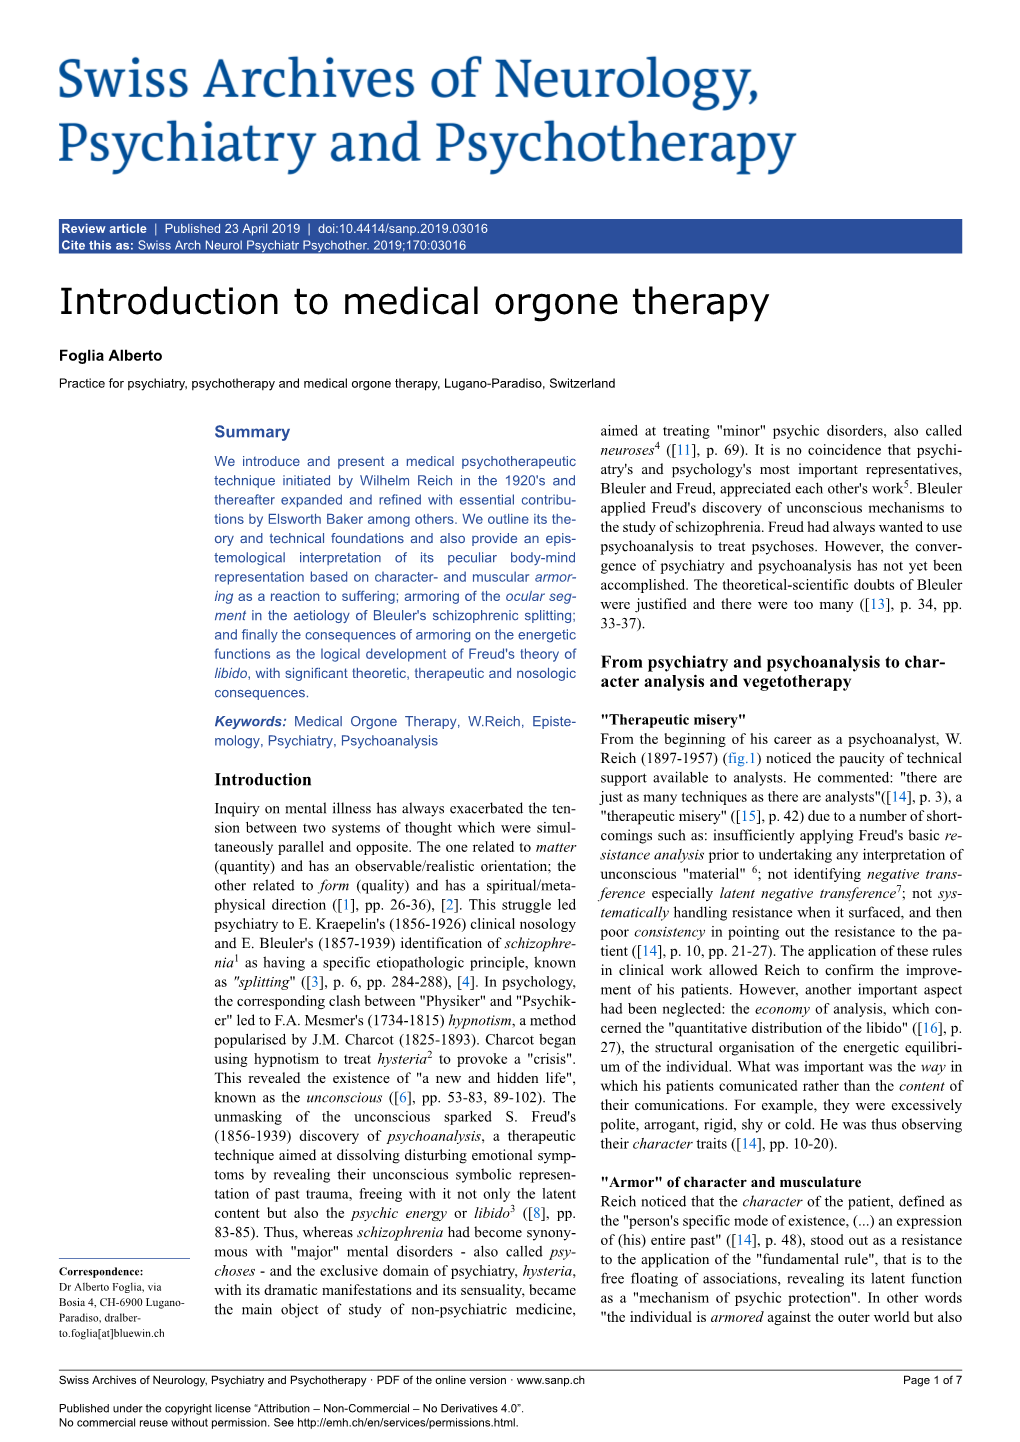 Introduction to Medical Orgone Therapy